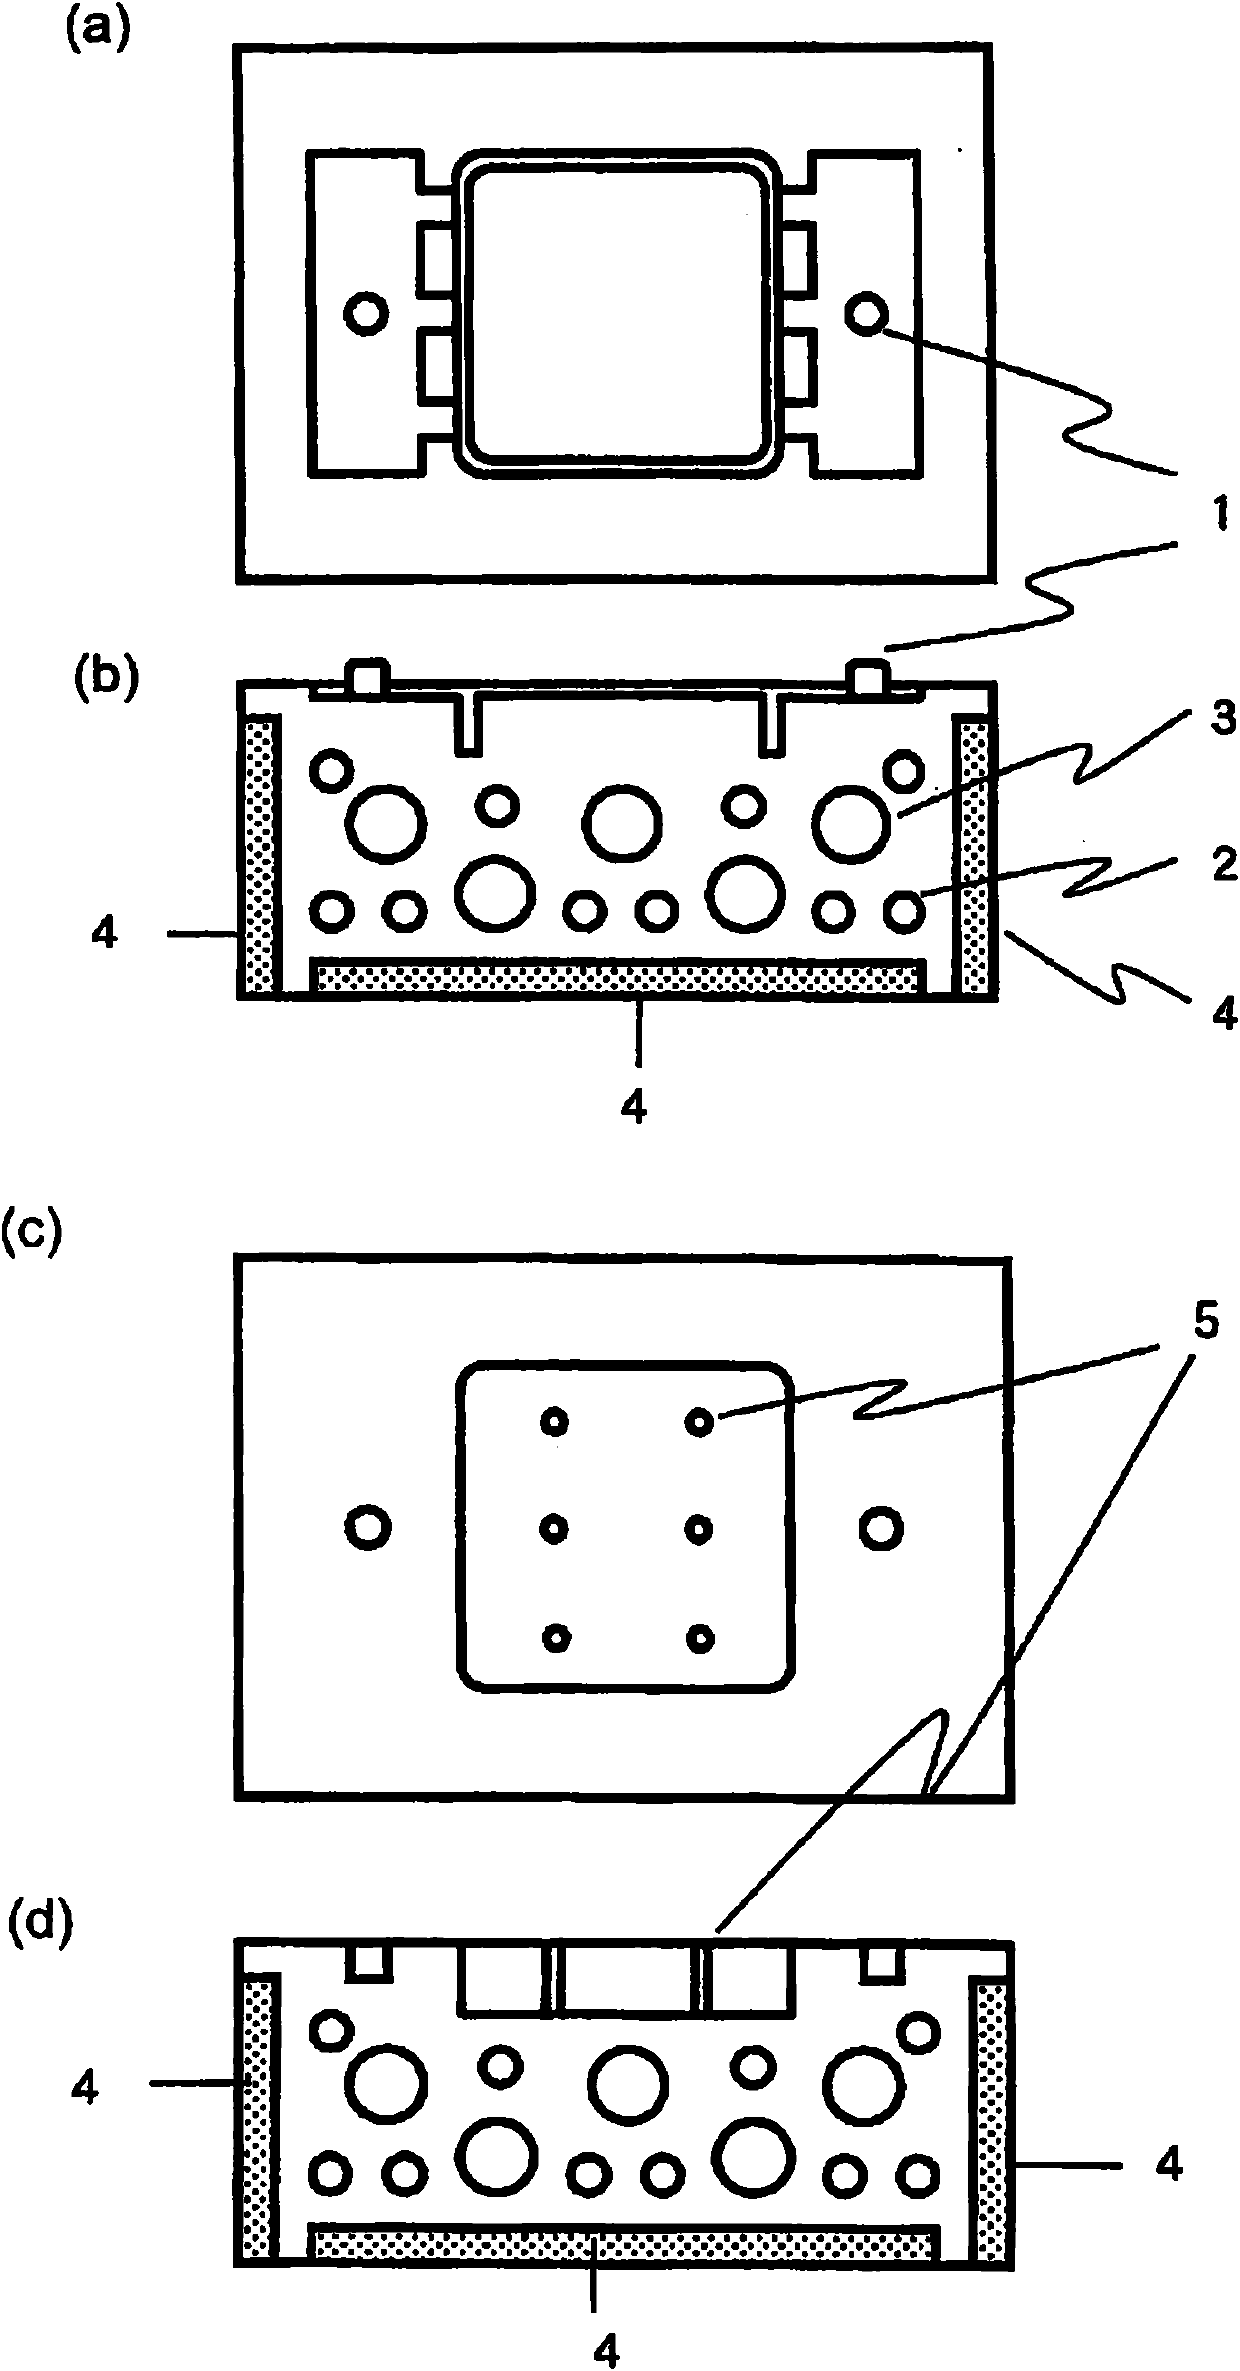 Process for producing composite molding